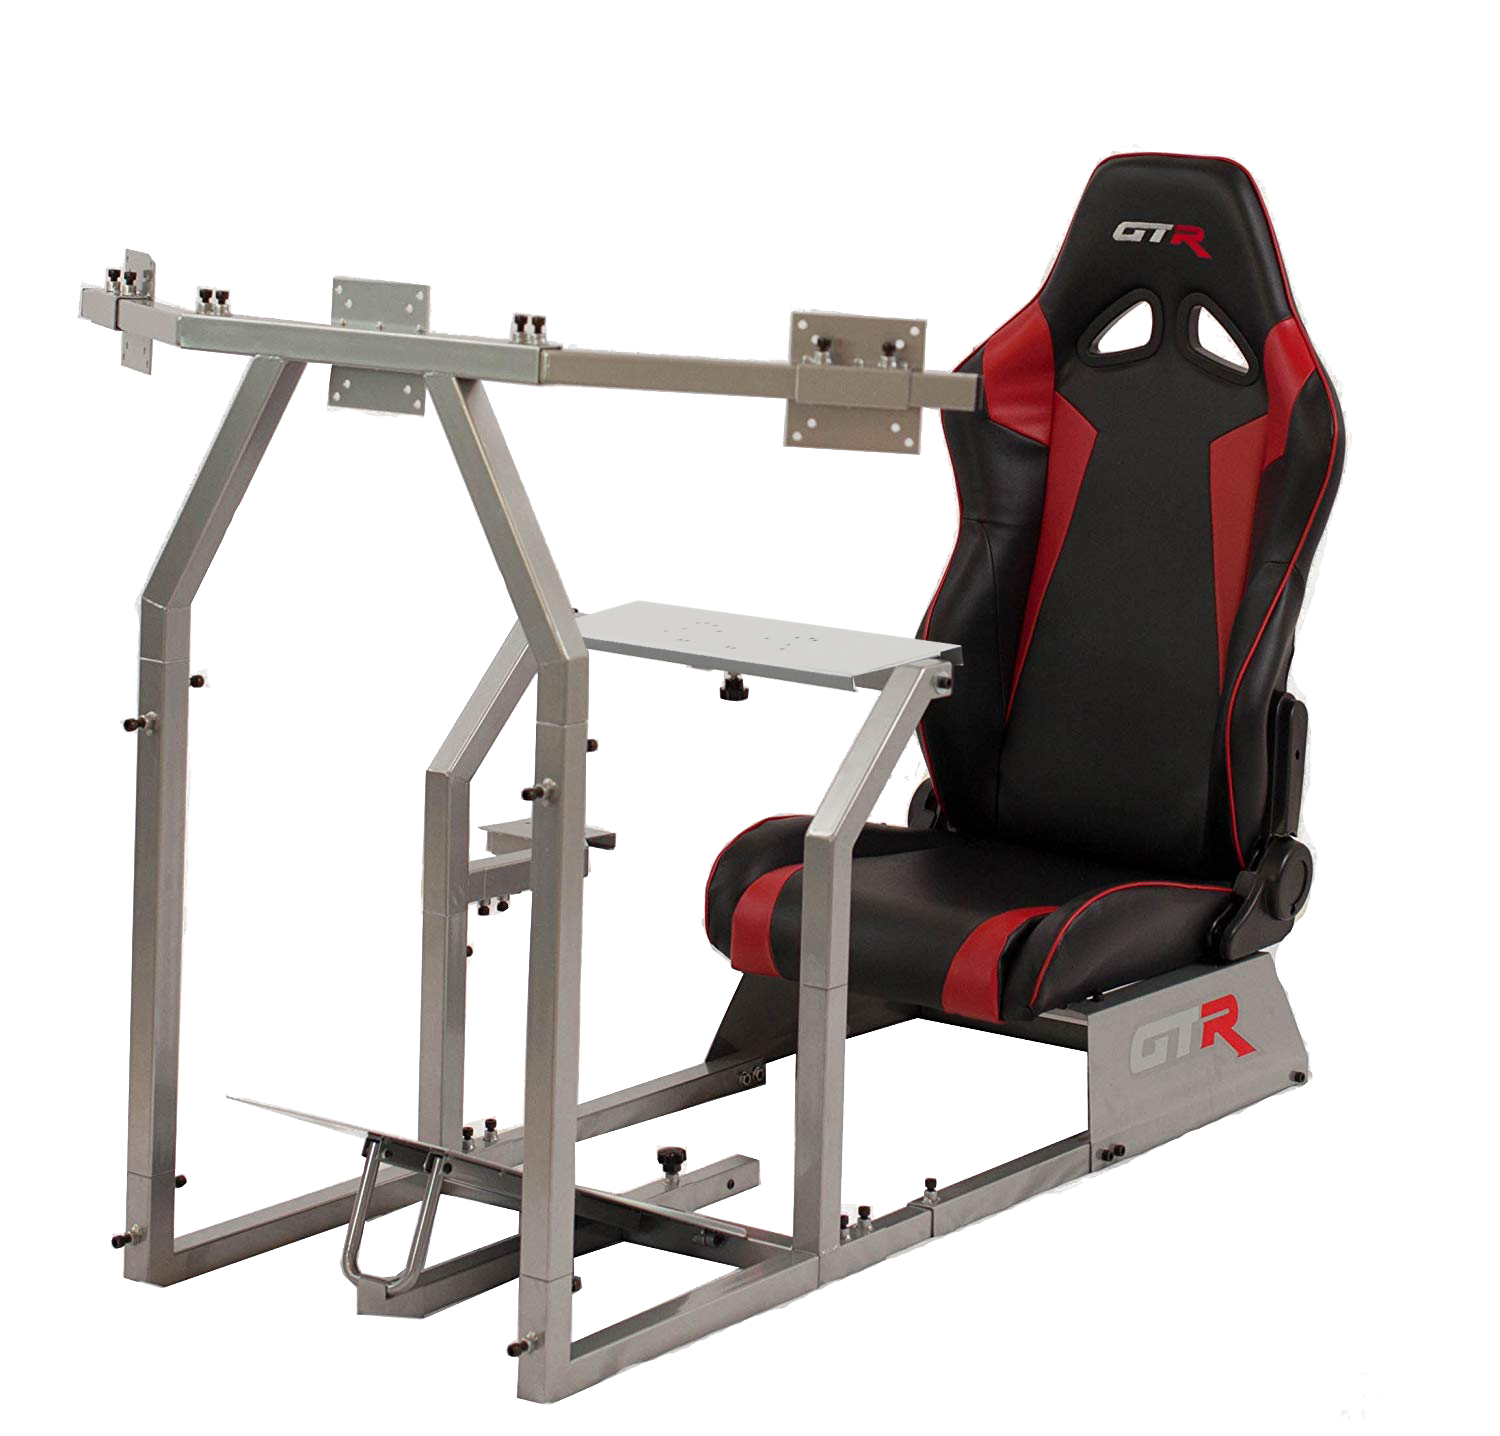 GTA-F Model Silver Frame with Black/Red Seat, triple monitor mount